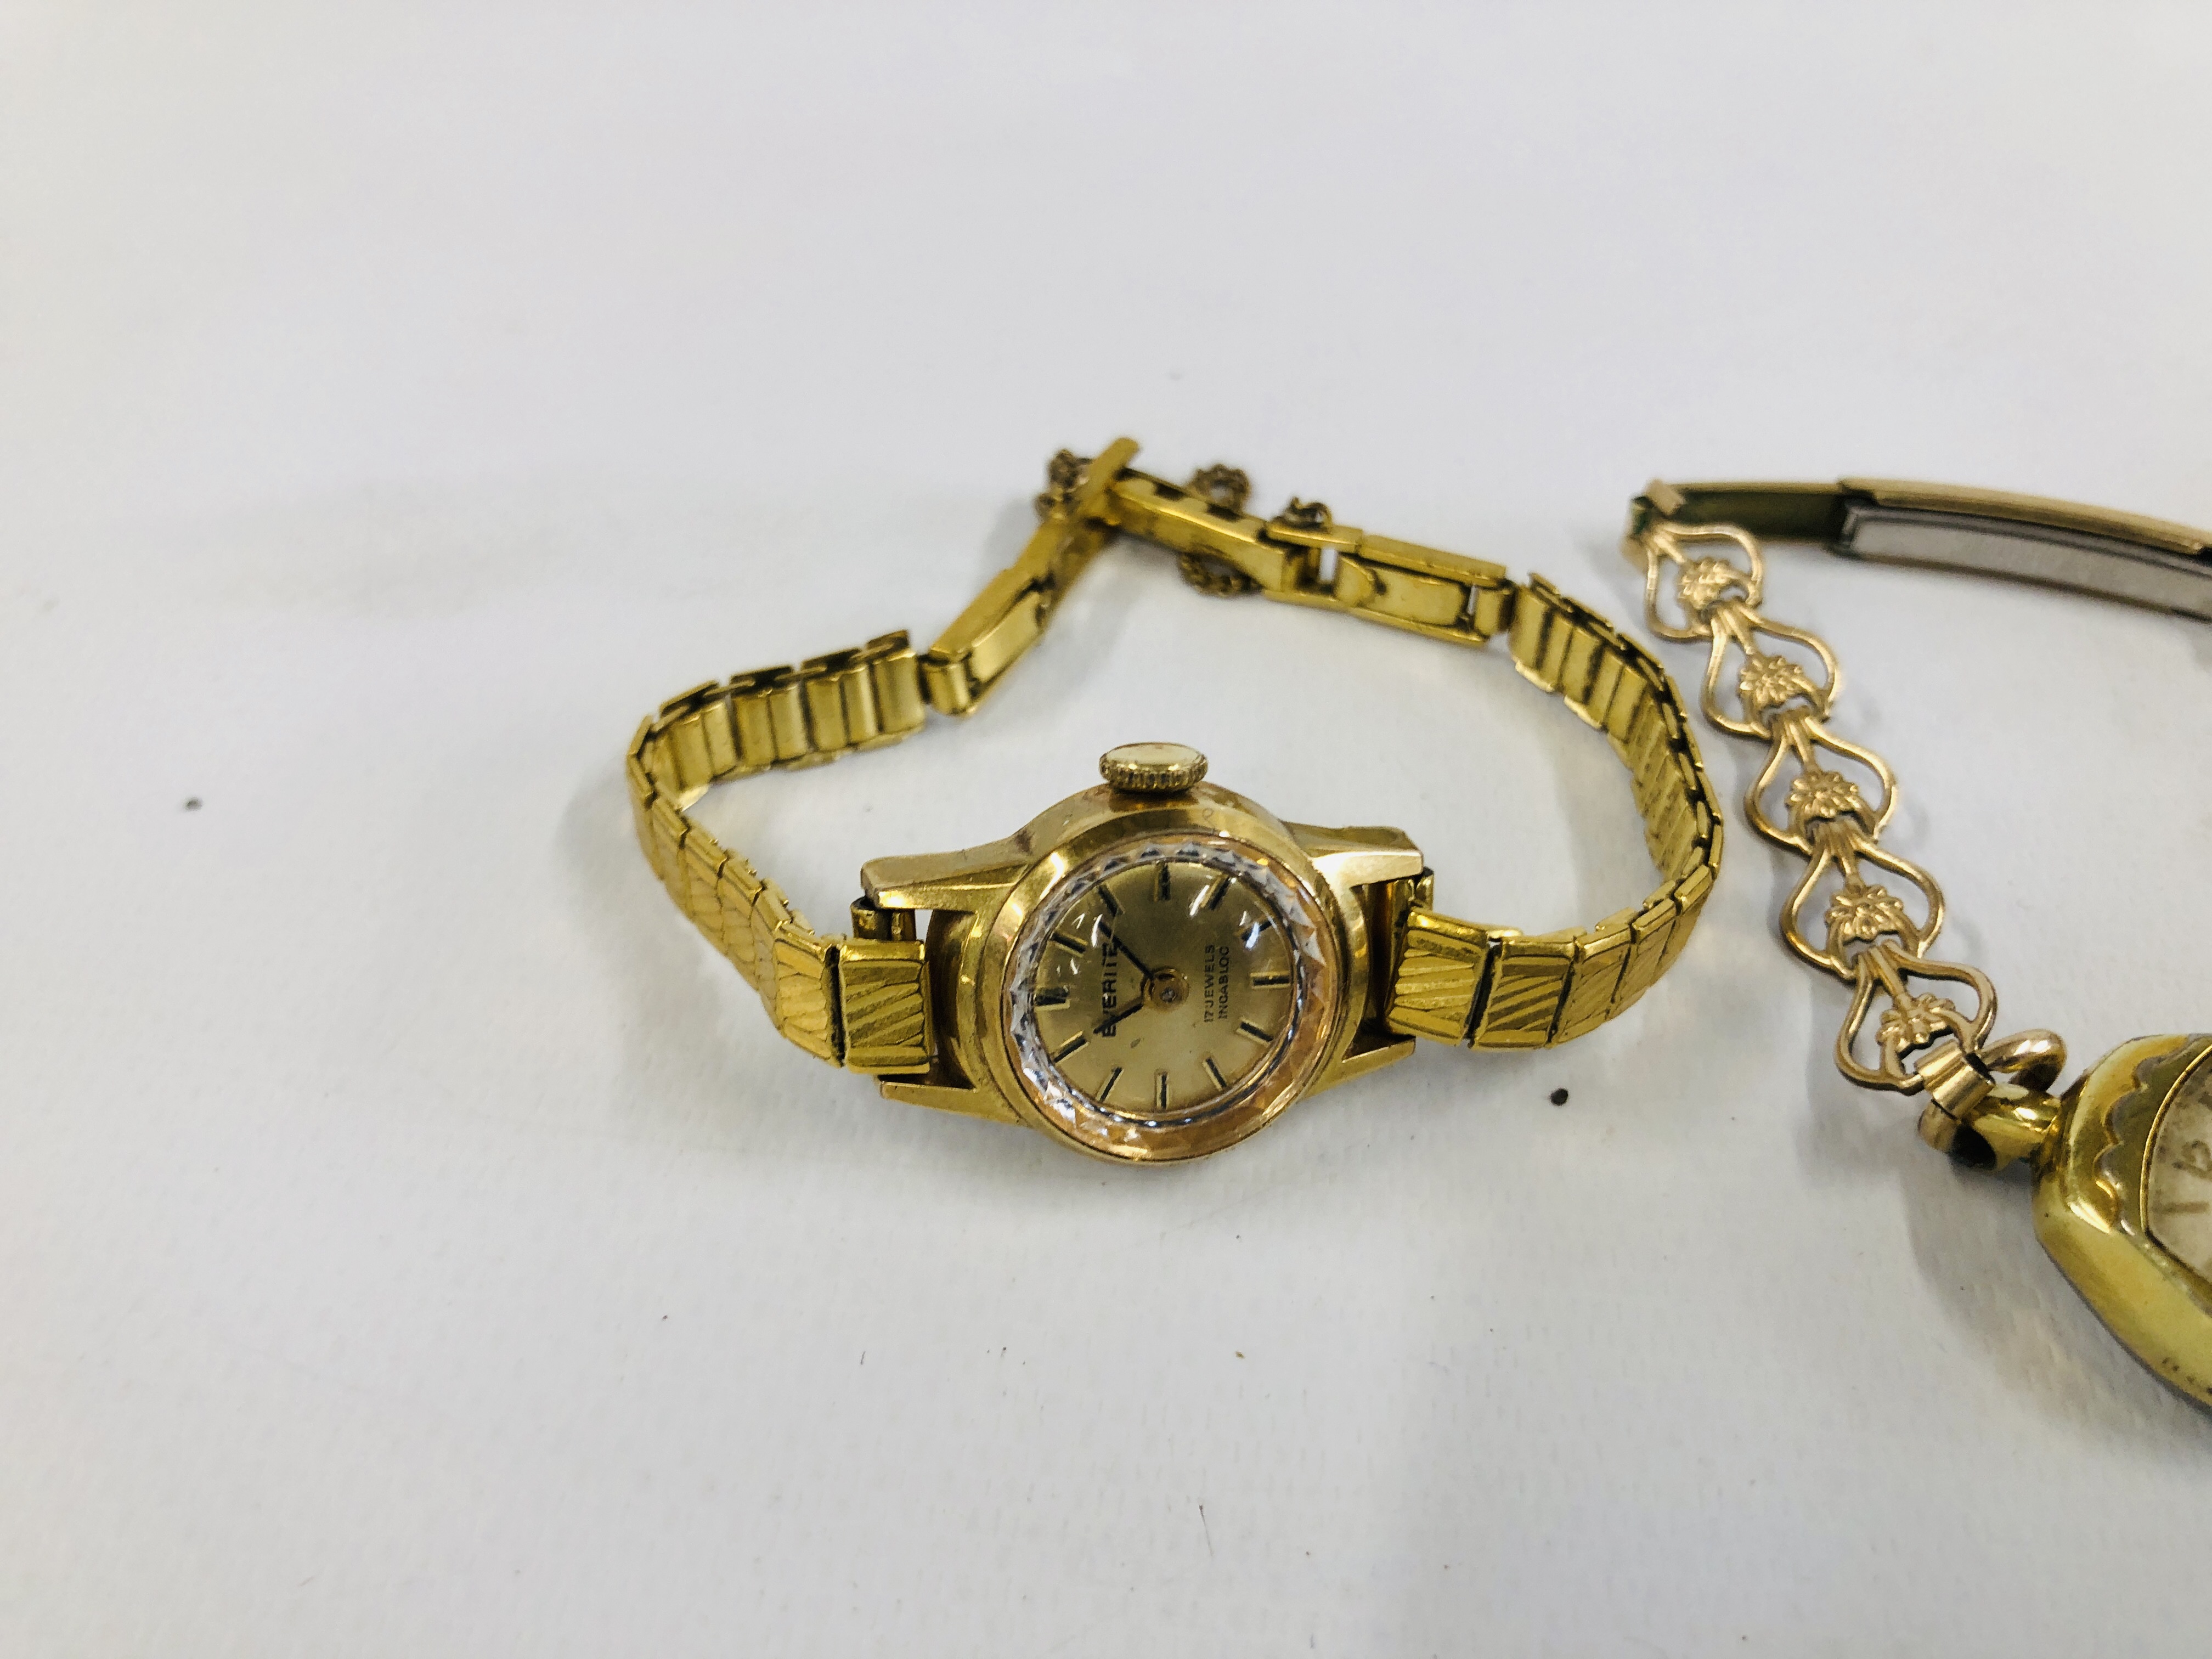 SELECTION OF 7 VINTAGE LADIES HAND WIND WRIST WATCHES TO INCLUDE SEKONDA, AVIA ETC. - Image 2 of 10